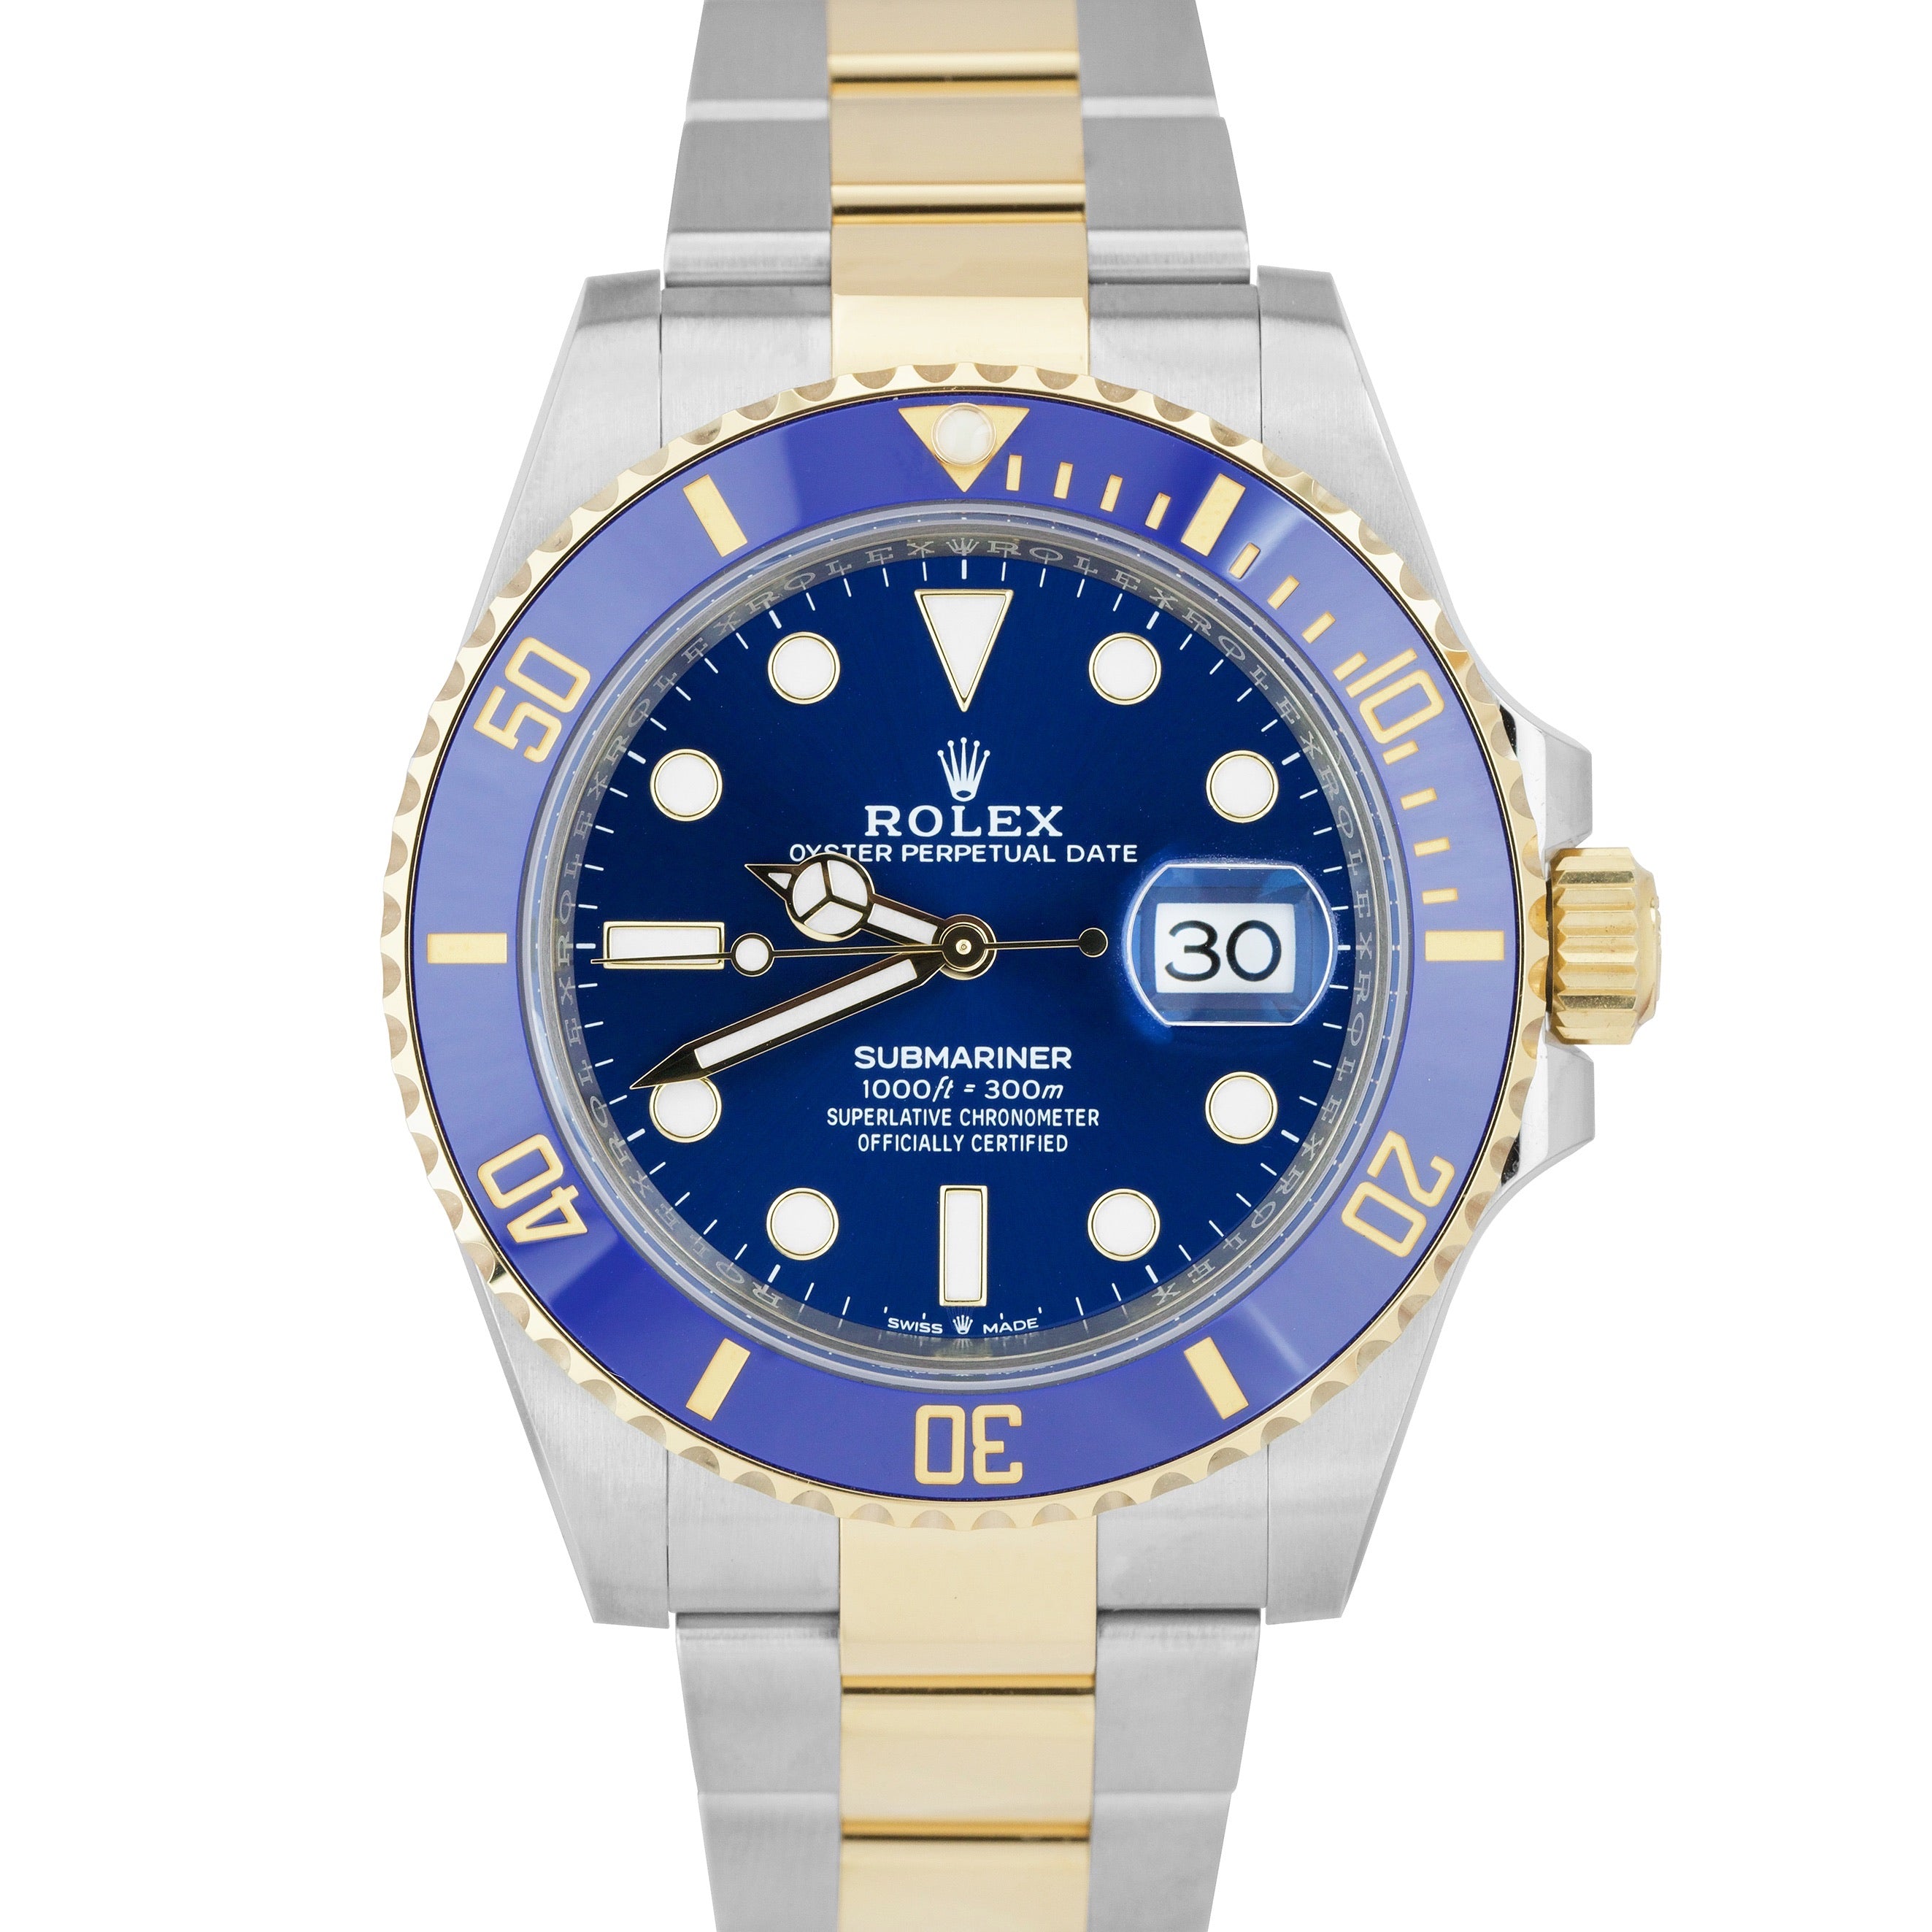 NEW 2021 Rolex Submariner Date 41mm Ceramic Two-Tone Gold Blue Watch 1